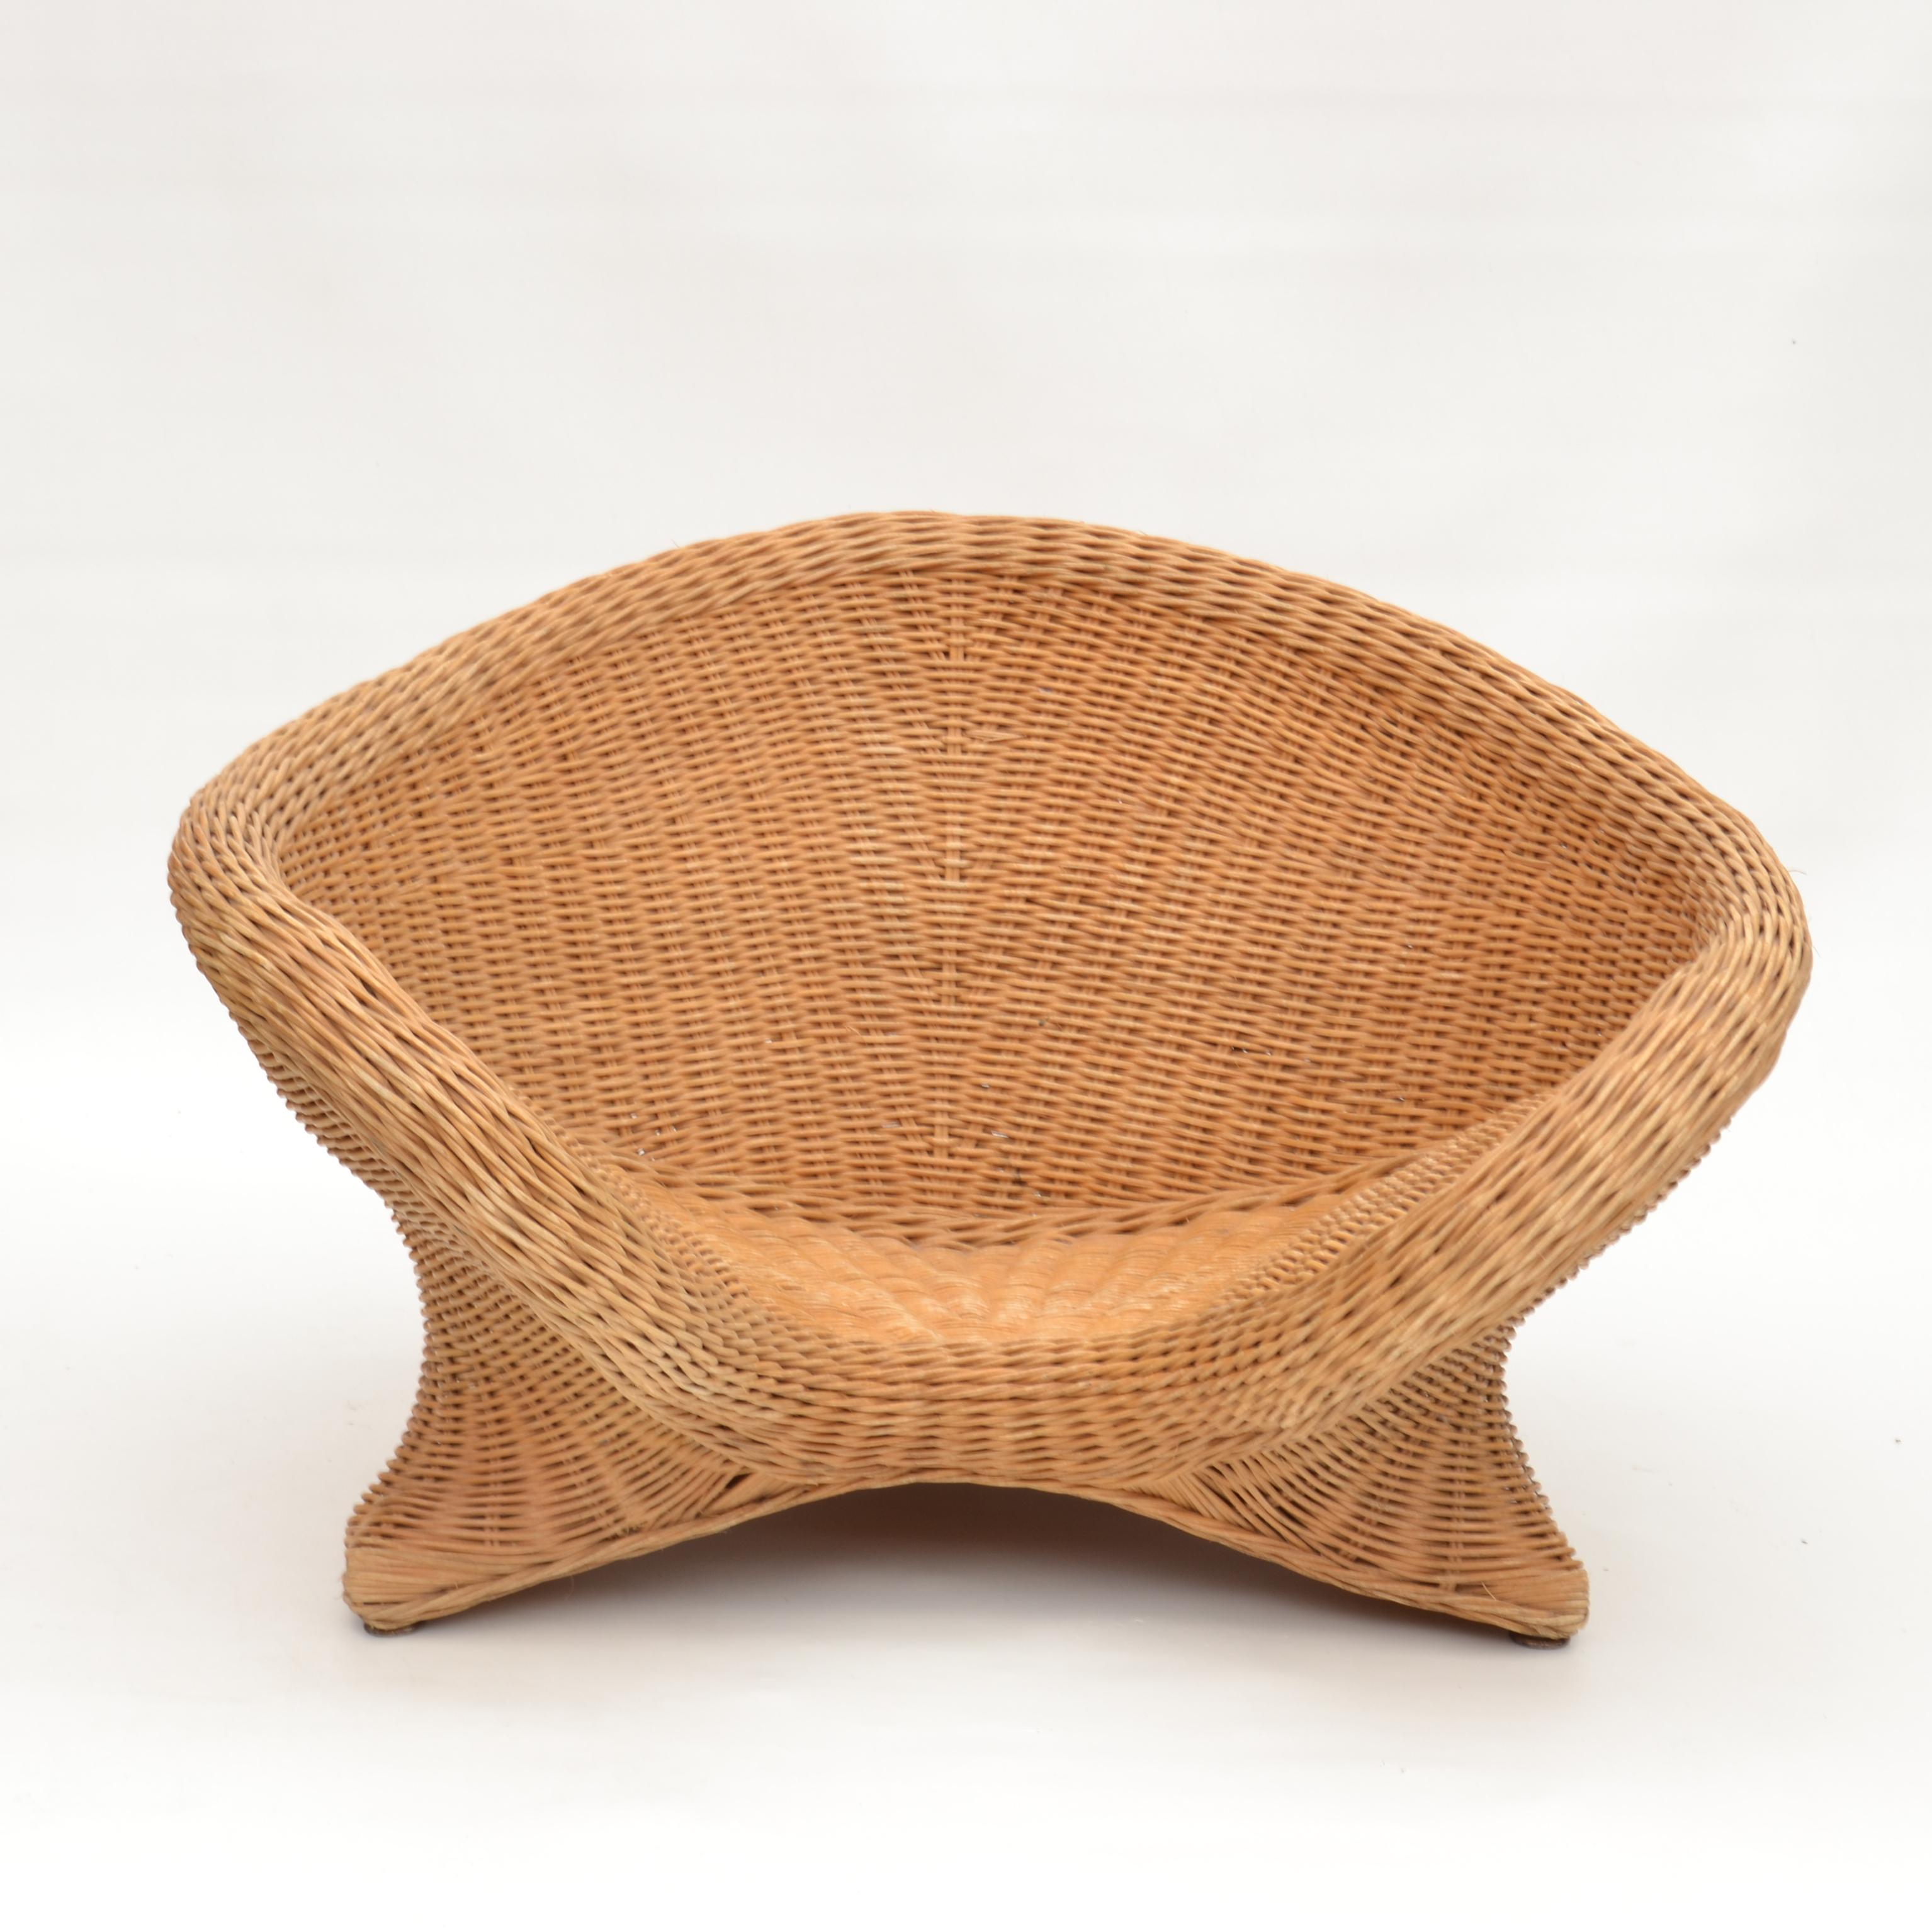 Rattan lounge chair hand woven for in or outdoors made by high skilled cane weaver over a bamboo inner construction. Comfortable curvaceous low chair, ideal in the garden or by the pool.